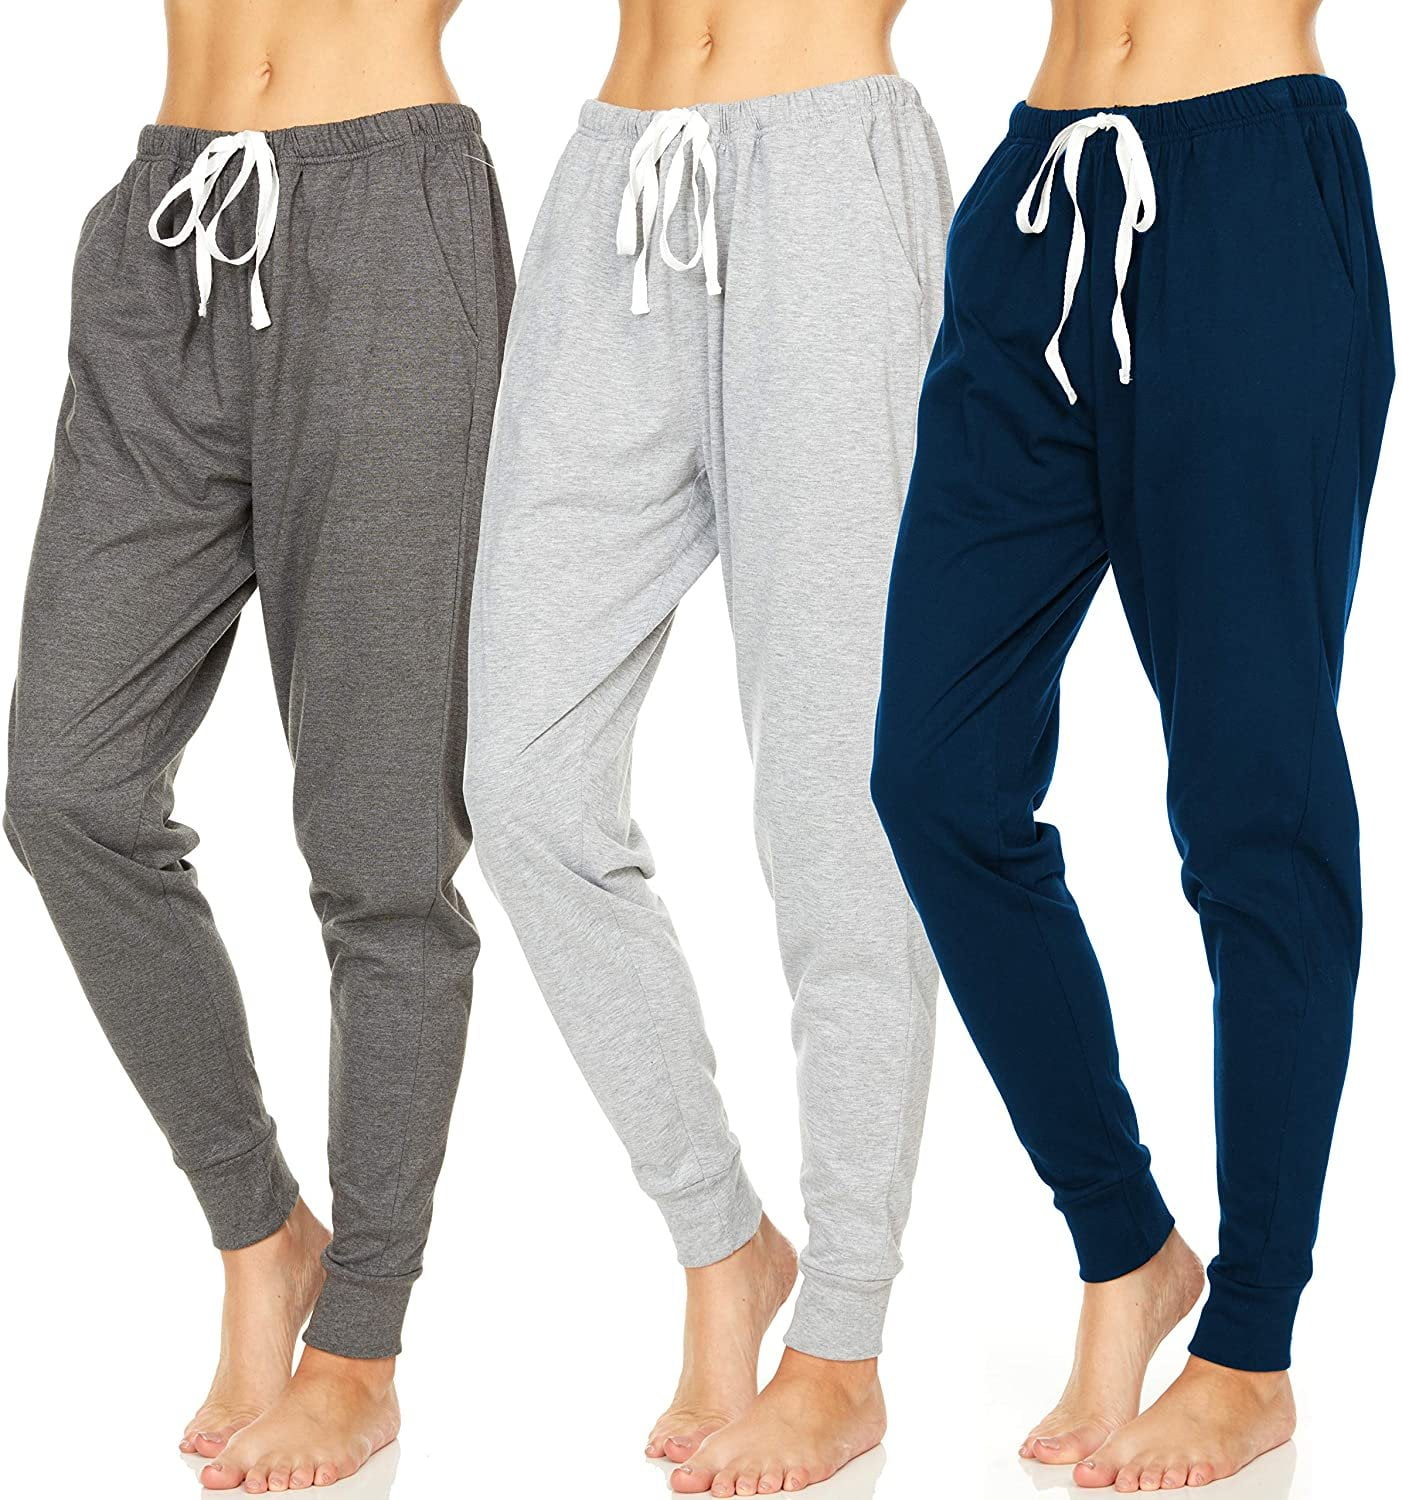 Essential Elements 3 Pack: Women's 100% Cotton Jersey Lightweight Lounge  Casual Sleep Pajama Jogger Pants X-Large, Set E 